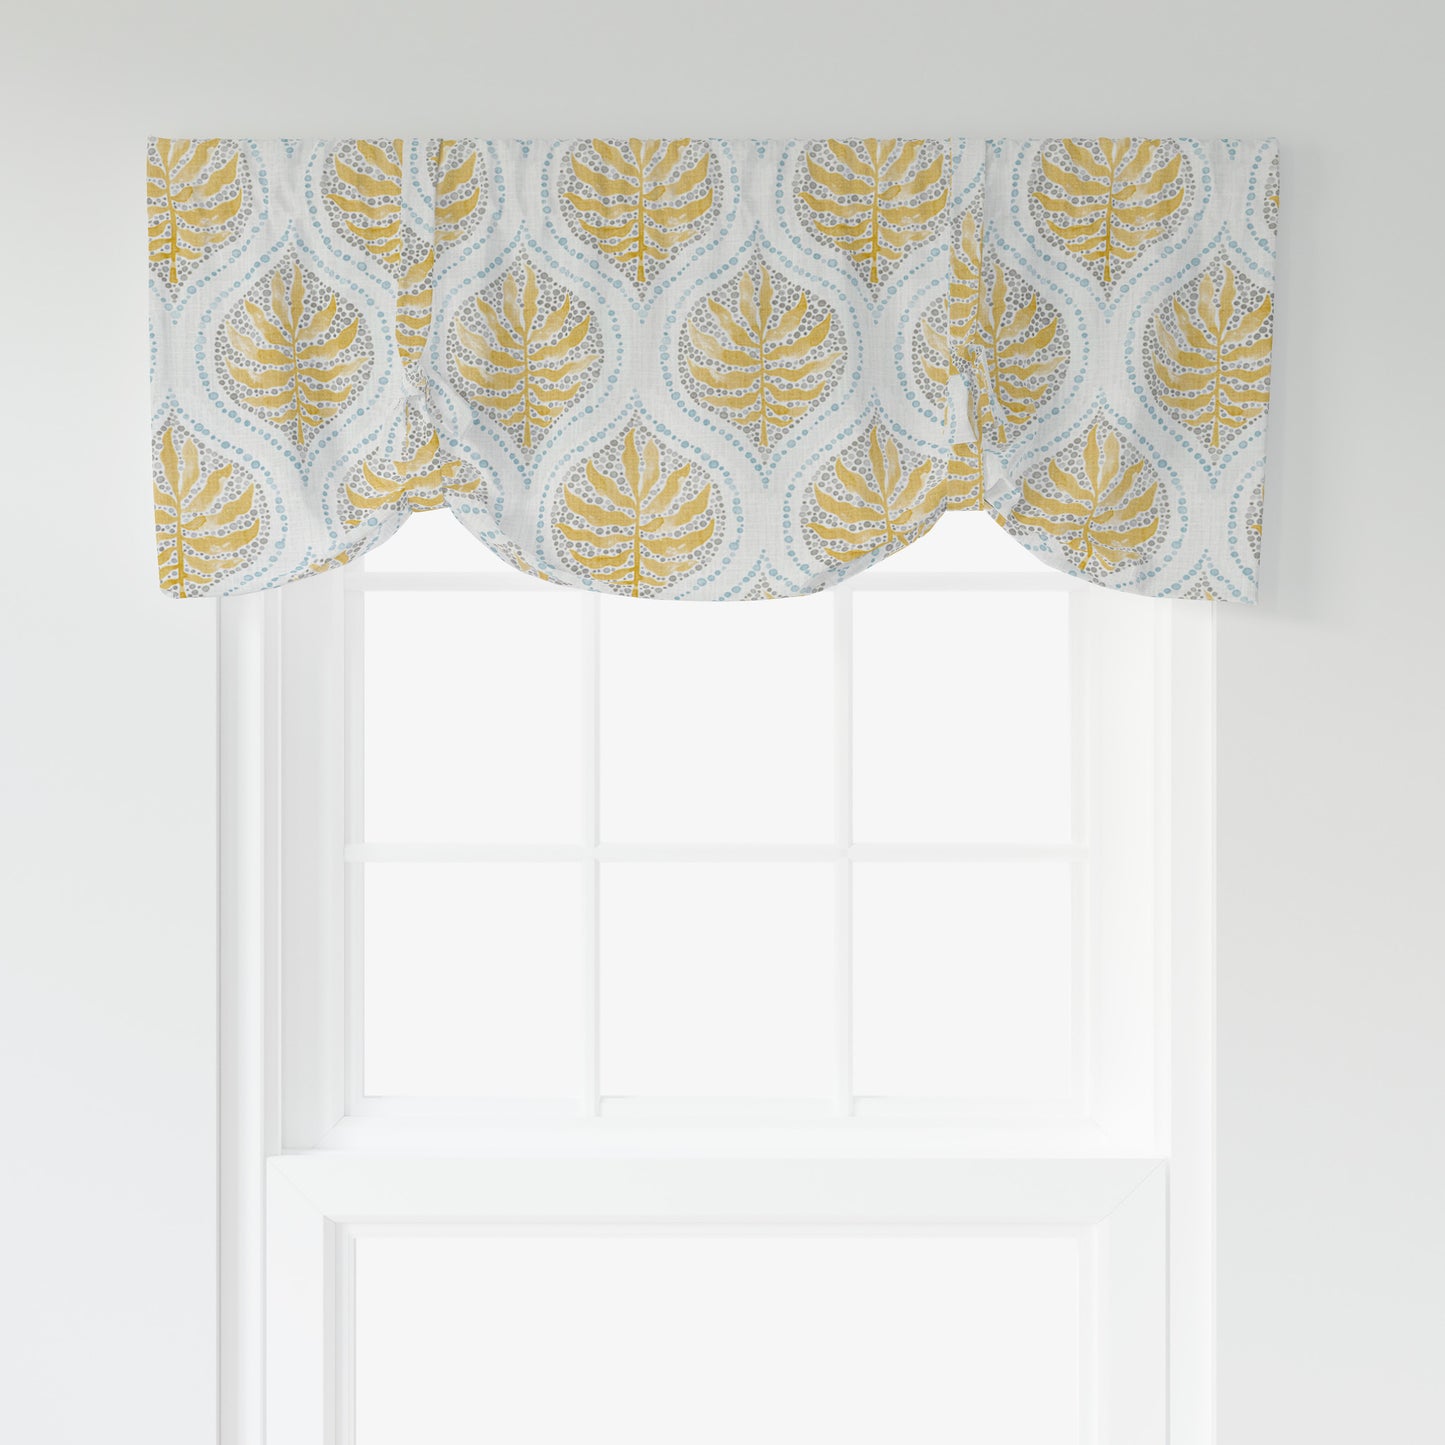 Tie-up Valance in Airlie Amber Ogee Floral Watercolor- Gold, Gray, Blue